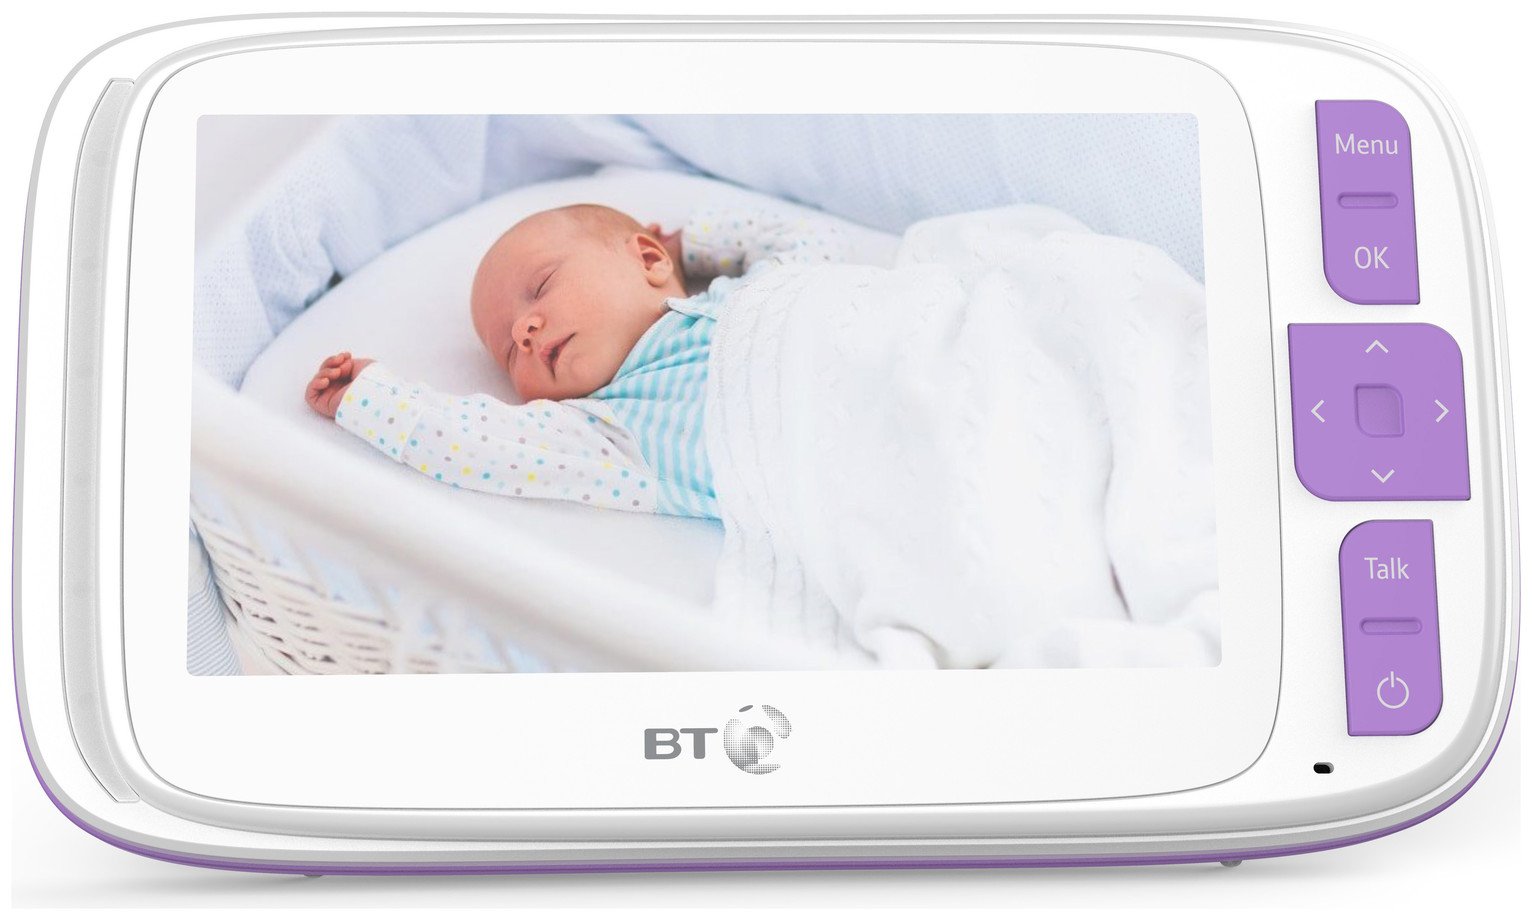 BT 6800 Smart Video 5 Inch Baby Monitor Review